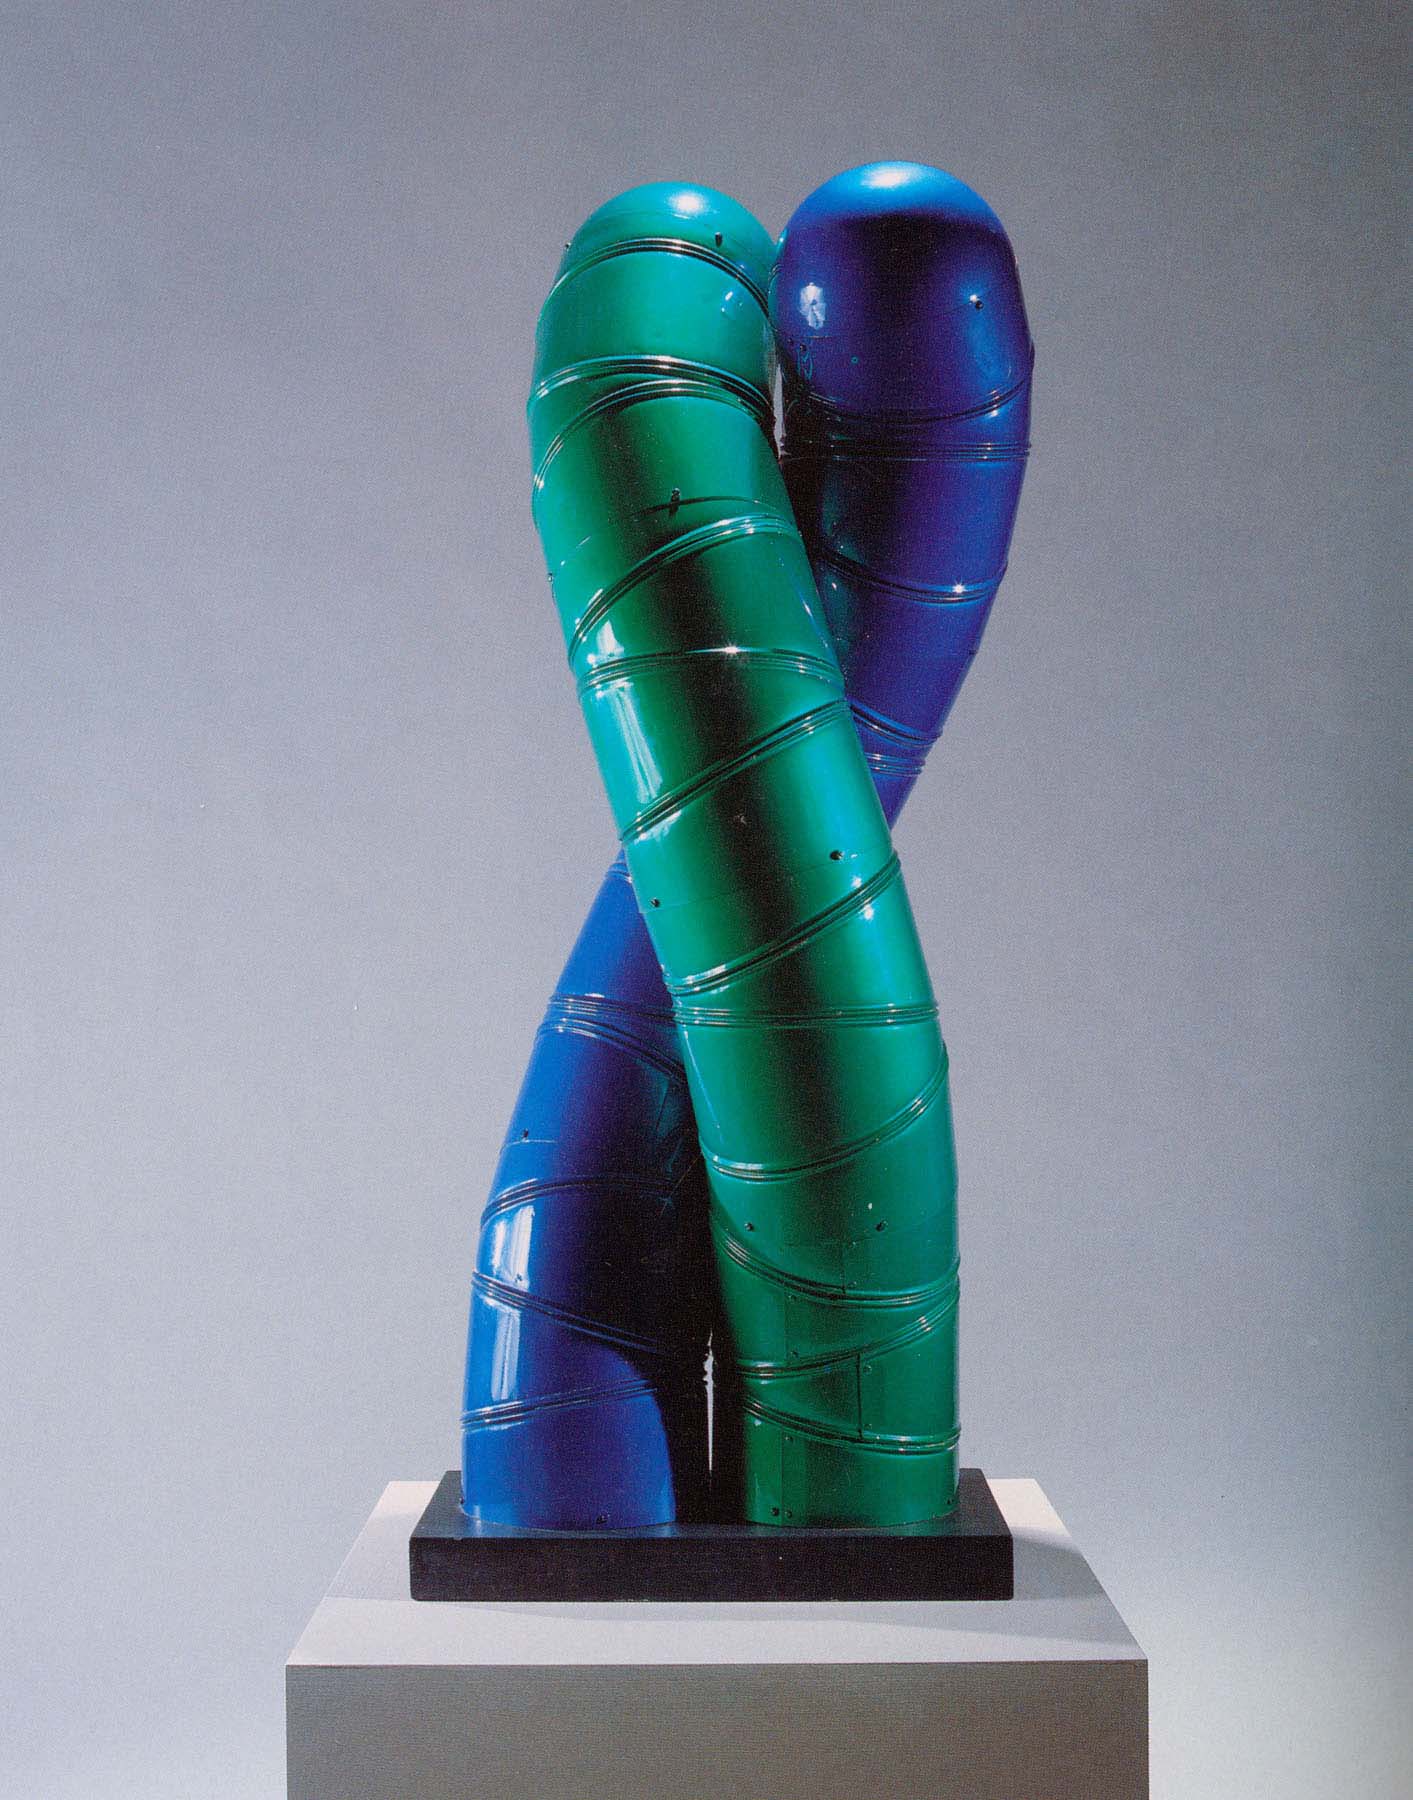 Sculpture of one blue and one green tube that extend upright and twist closely around each other.